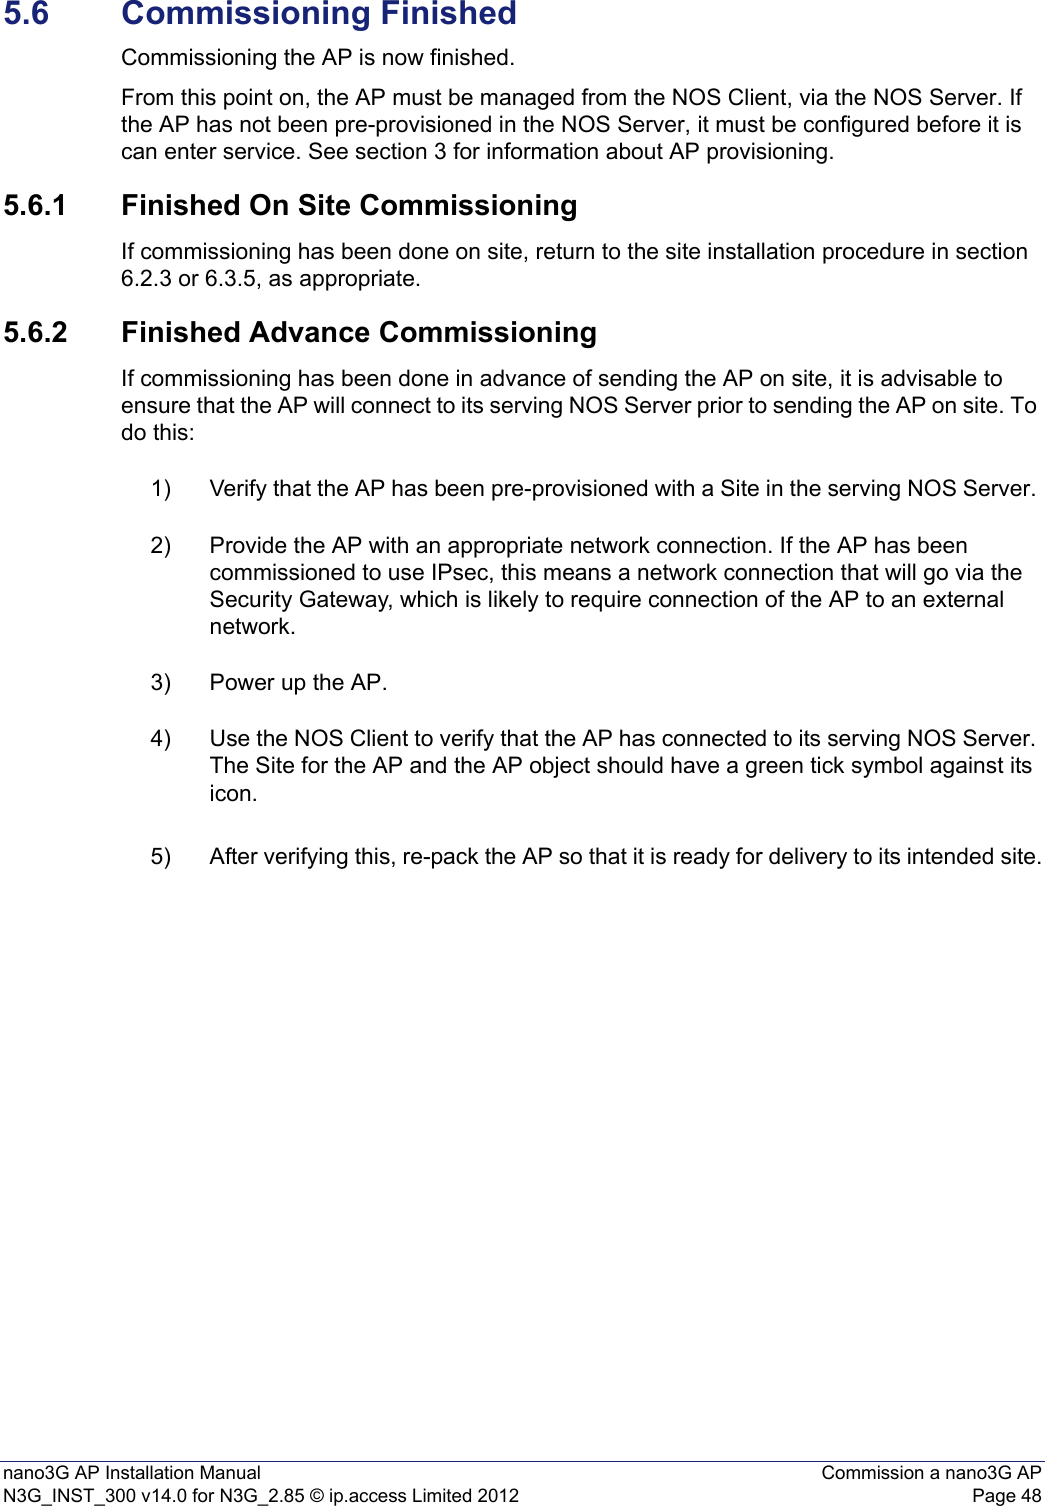 nano3G AP Installation Manual Commission a nano3G APN3G_INST_300 v14.0 for N3G_2.85 © ip.access Limited 2012 Page 485.6 Commissioning FinishedCommissioning the AP is now finished. From this point on, the AP must be managed from the NOS Client, via the NOS Server. If the AP has not been pre-provisioned in the NOS Server, it must be configured before it is can enter service. See section 3 for information about AP provisioning.5.6.1 Finished On Site CommissioningIf commissioning has been done on site, return to the site installation procedure in section 6.2.3 or 6.3.5, as appropriate. 5.6.2 Finished Advance CommissioningIf commissioning has been done in advance of sending the AP on site, it is advisable to ensure that the AP will connect to its serving NOS Server prior to sending the AP on site. To do this:1) Verify that the AP has been pre-provisioned with a Site in the serving NOS Server. 2) Provide the AP with an appropriate network connection. If the AP has been commissioned to use IPsec, this means a network connection that will go via the Security Gateway, which is likely to require connection of the AP to an external network. 3) Power up the AP. 4) Use the NOS Client to verify that the AP has connected to its serving NOS Server. The Site for the AP and the AP object should have a green tick symbol against its icon. 5) After verifying this, re-pack the AP so that it is ready for delivery to its intended site.